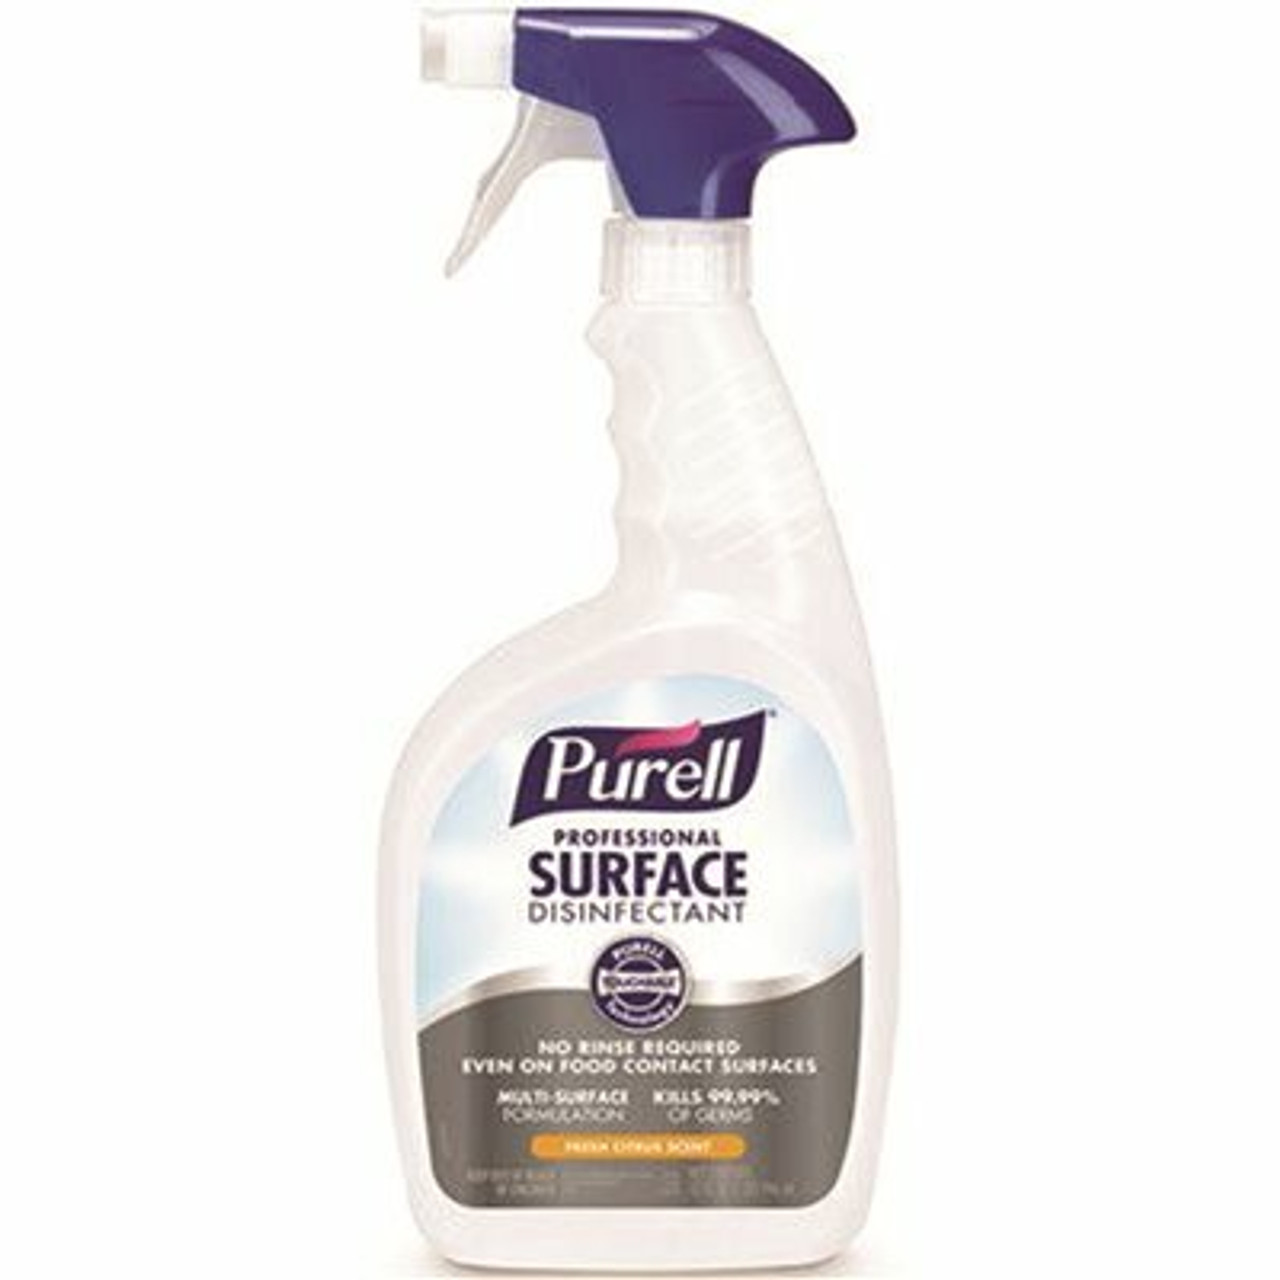 Professional Surface Disinfectant Spray, Citrus Scent, 32 Fl. Oz. Capped Bottle With Spray Trigger (Pack Of 6 Per Case)